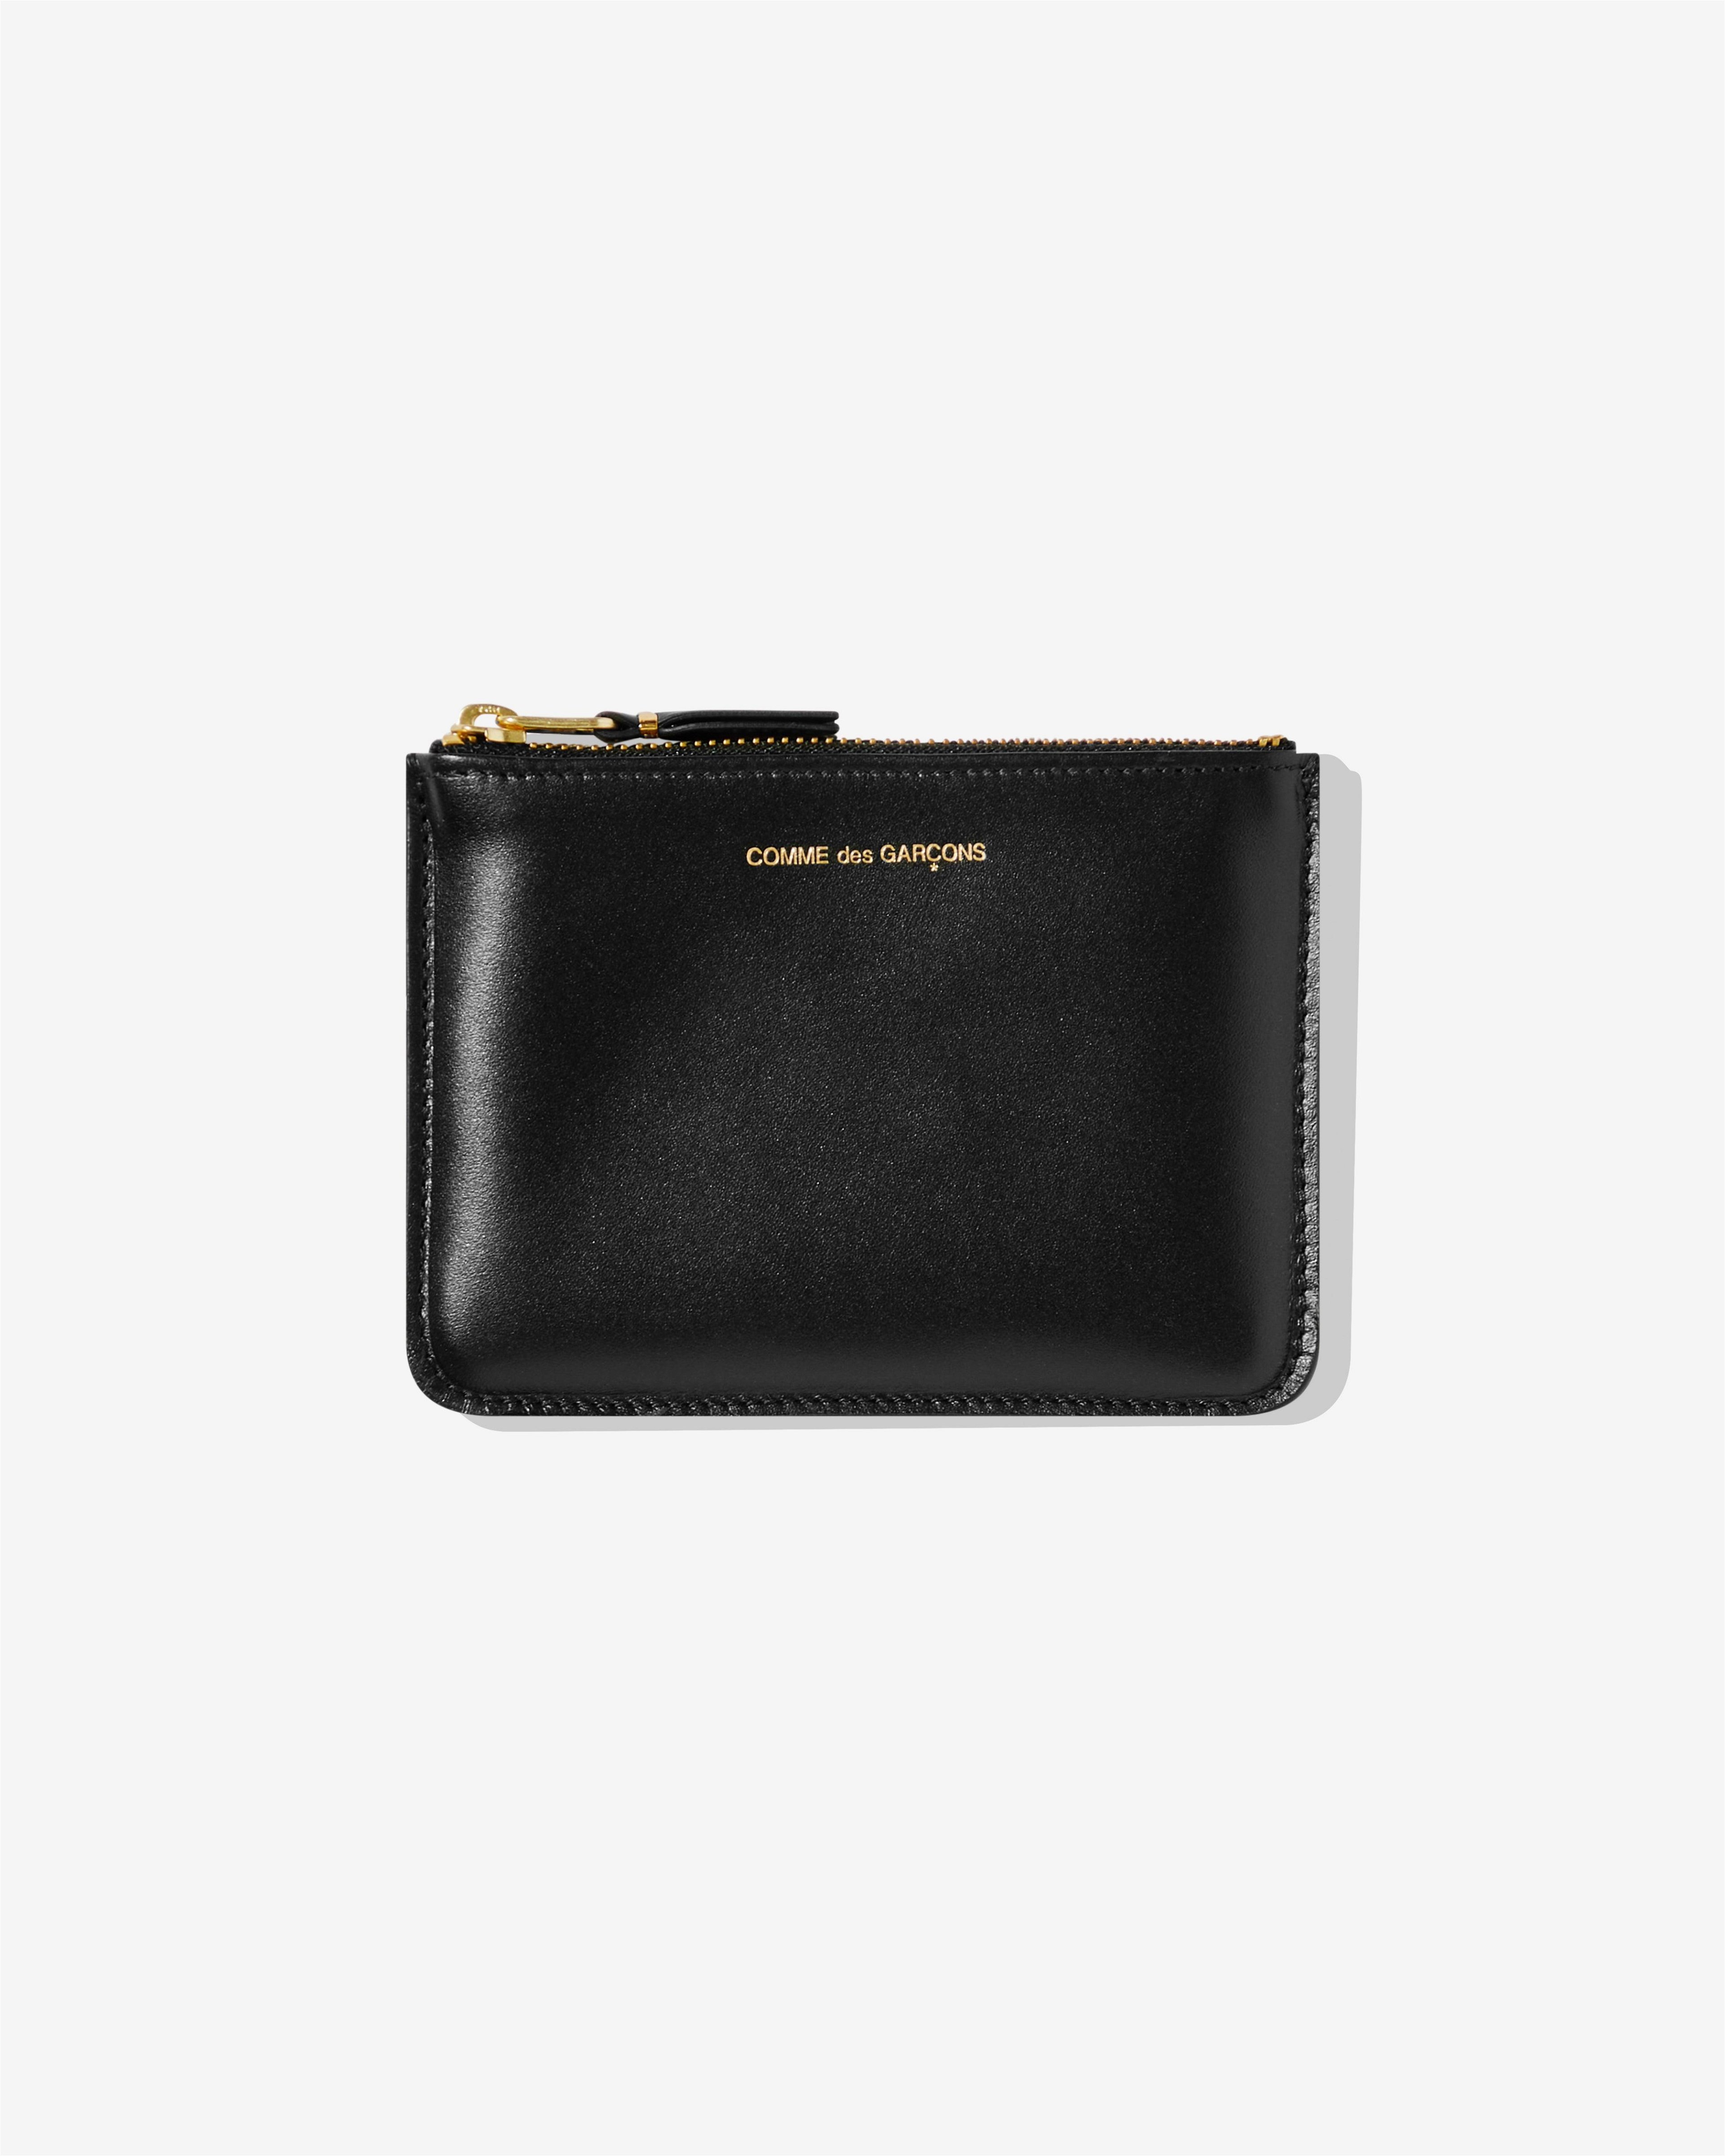 CDG Wallet - Inside Check Zip Pouch - (Check SA8100CP) by COMME DES GARCONS